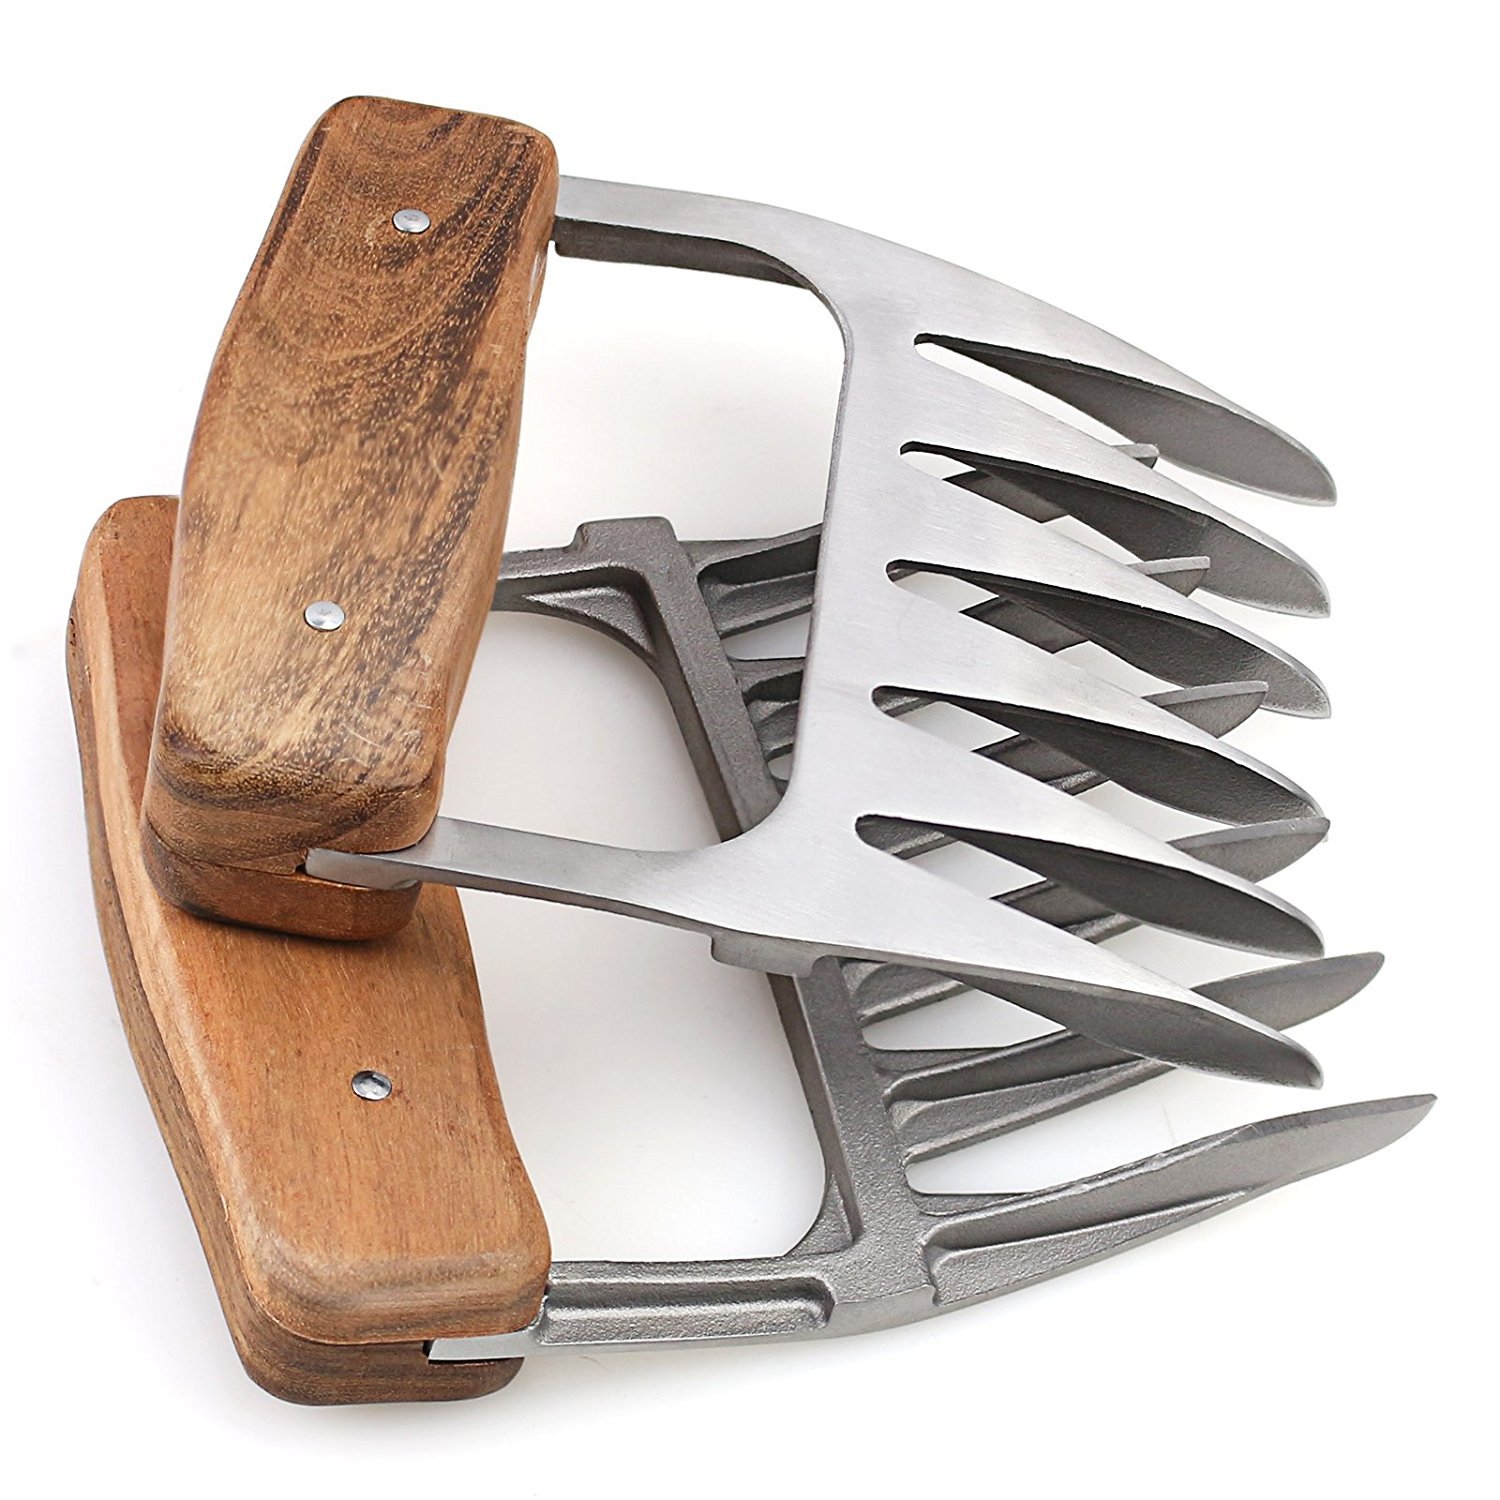 Plastic or Stainless Steel Meat-Shredding Claws